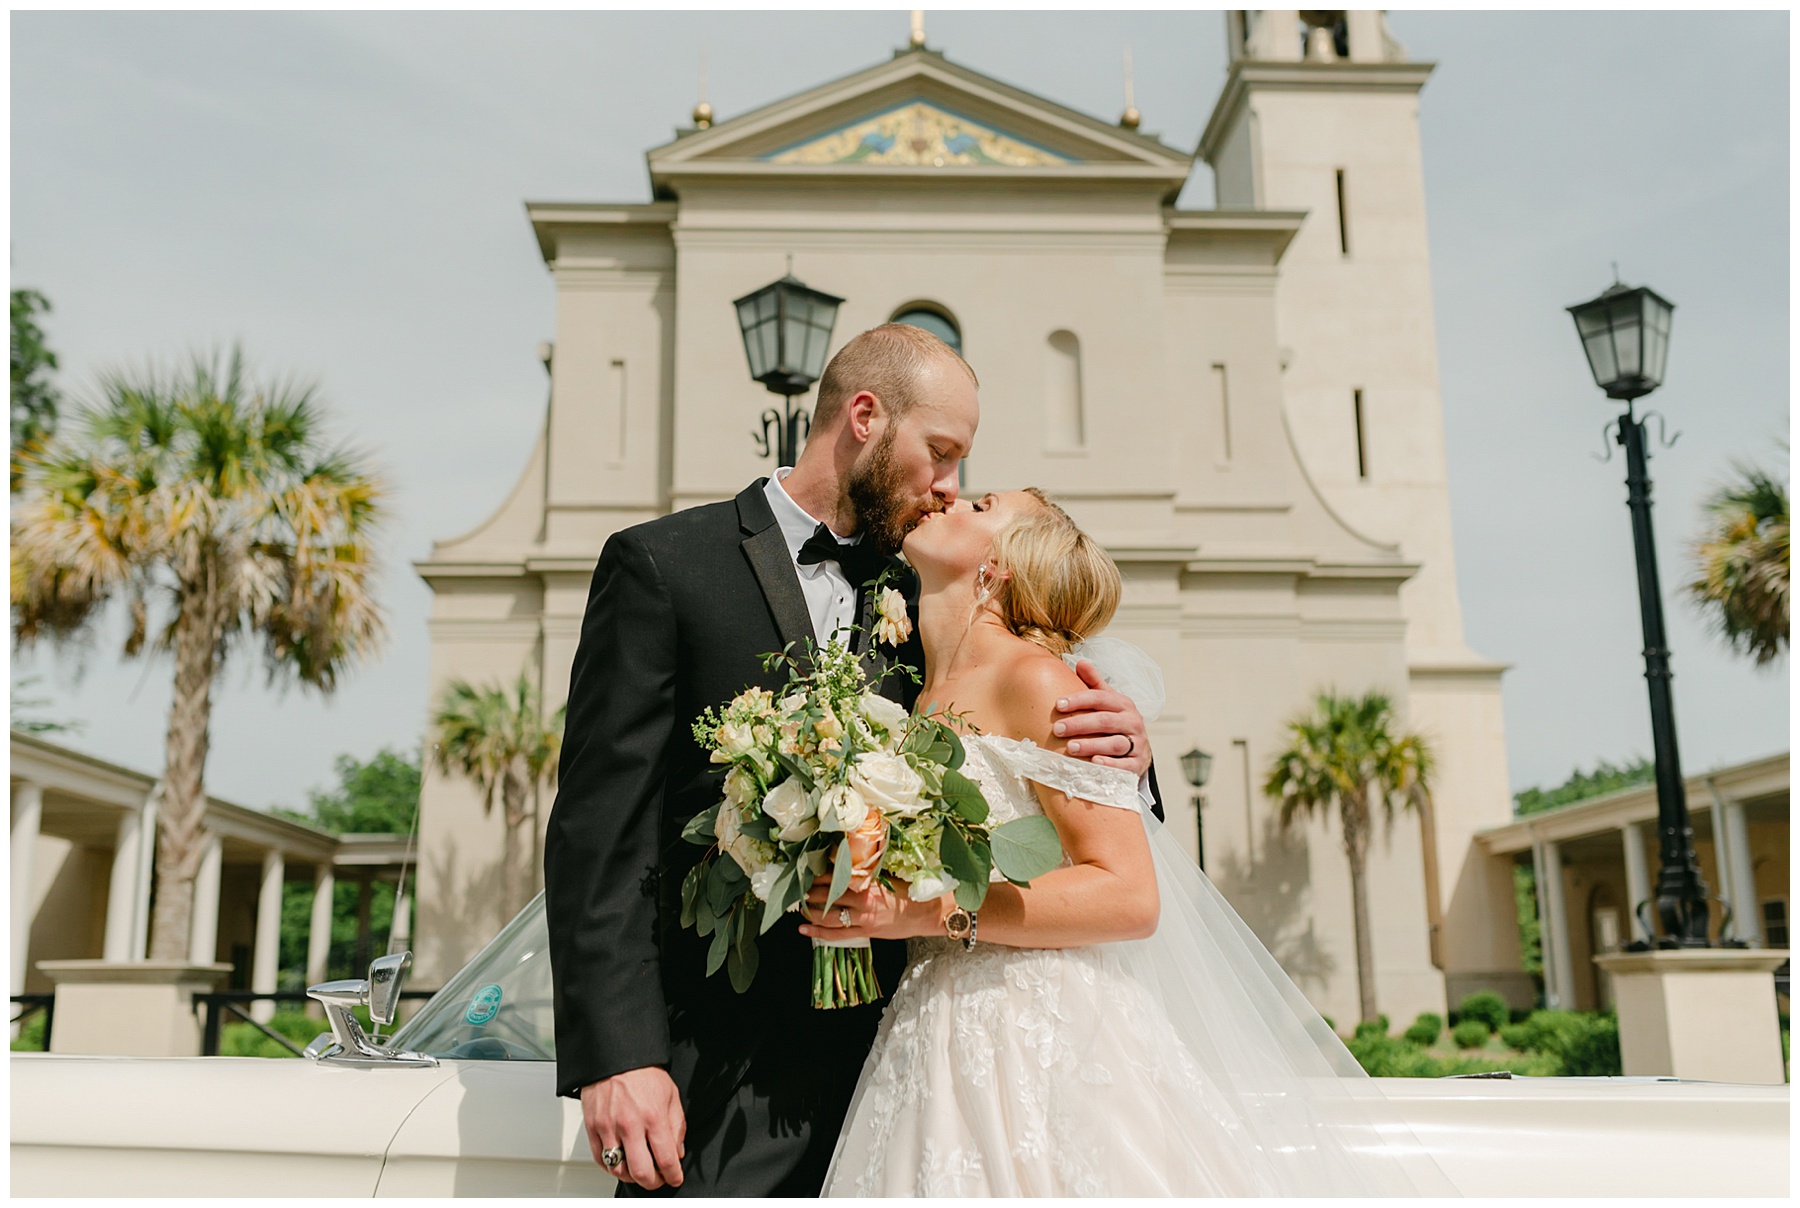 bride and groom kissing in front of chapel and vintage car South Carolina Catholic wedding